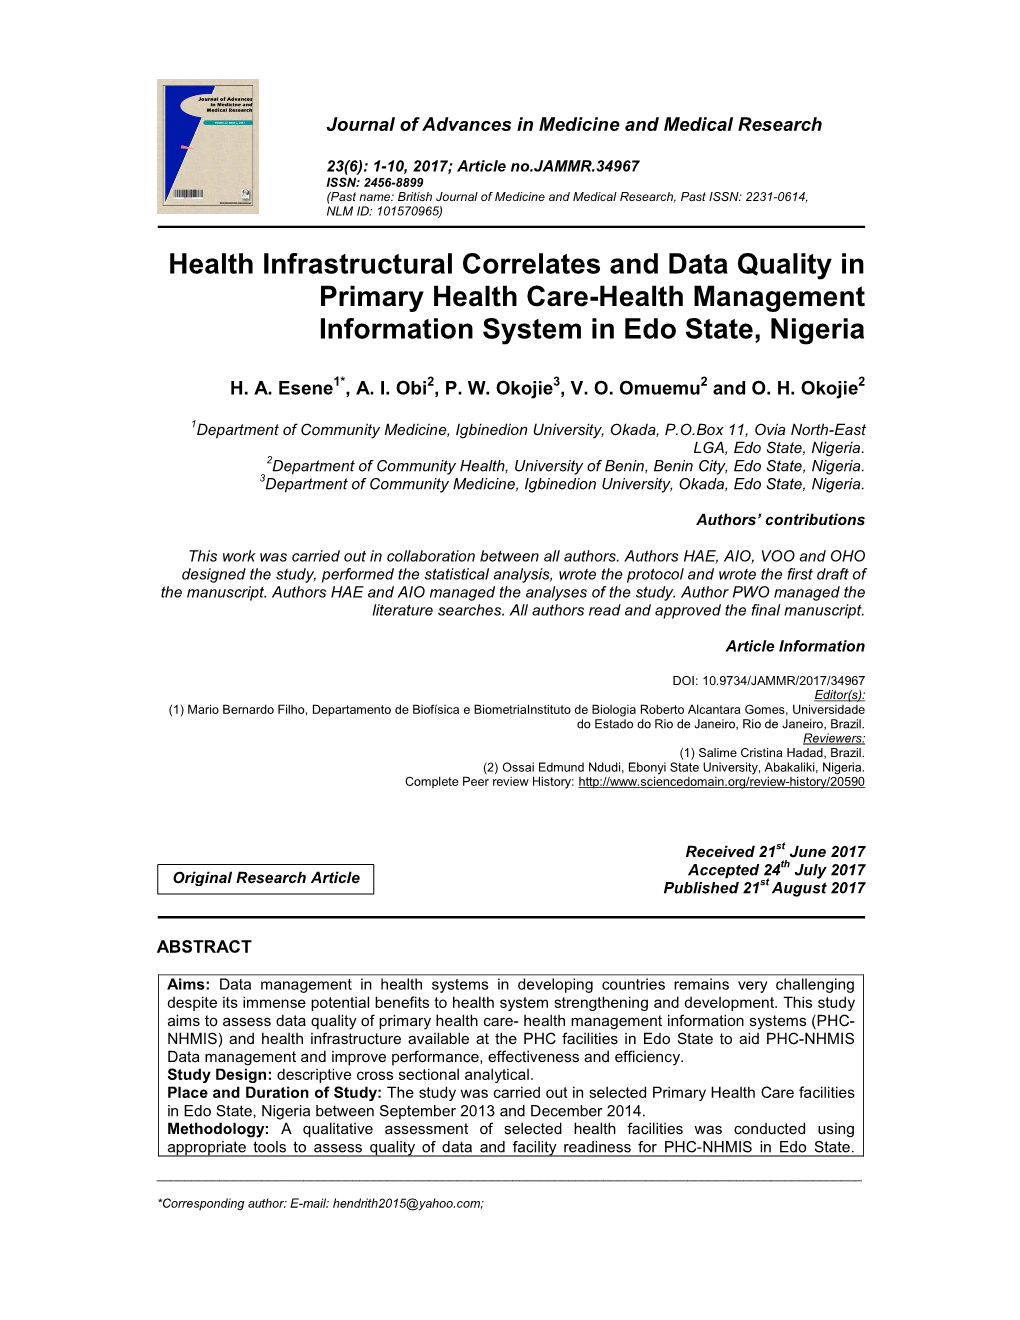 Health Infrastructural Correlates and Data Quality in Primary Health Care-Health Management Information System in Edo State, Nigeria